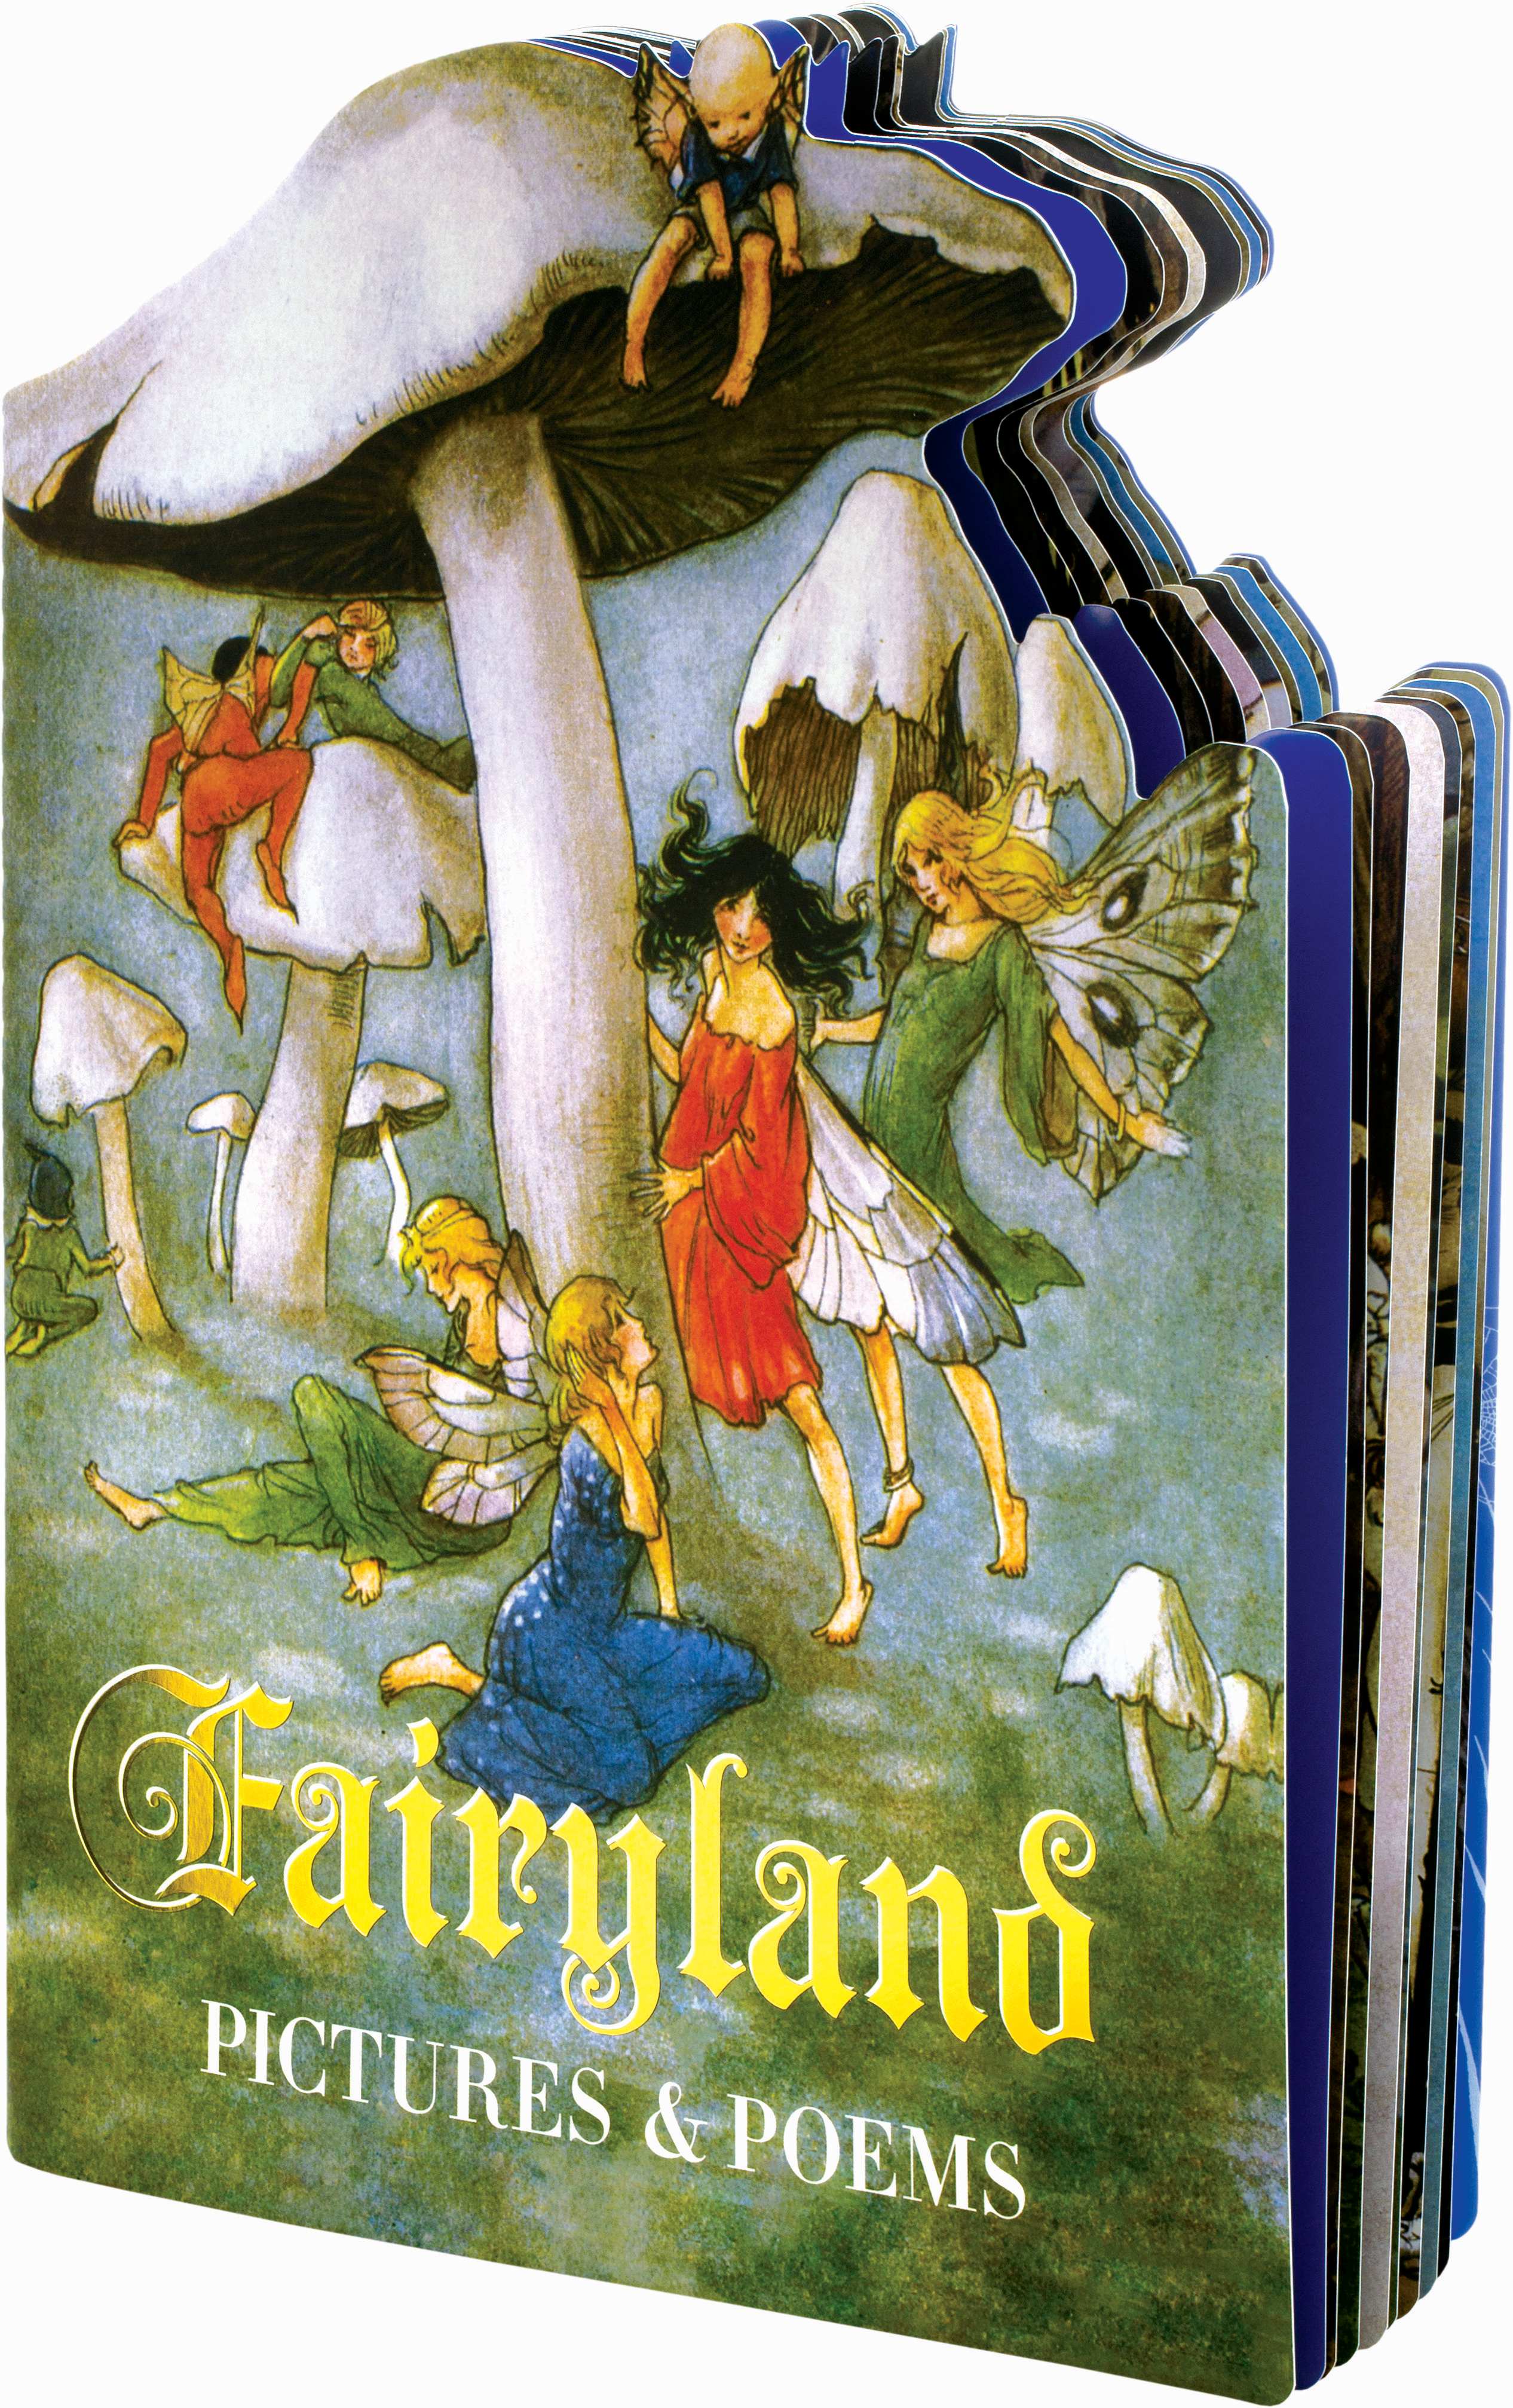 Fairyland-Pictures And Poems-Children's Picture Book-Vintage